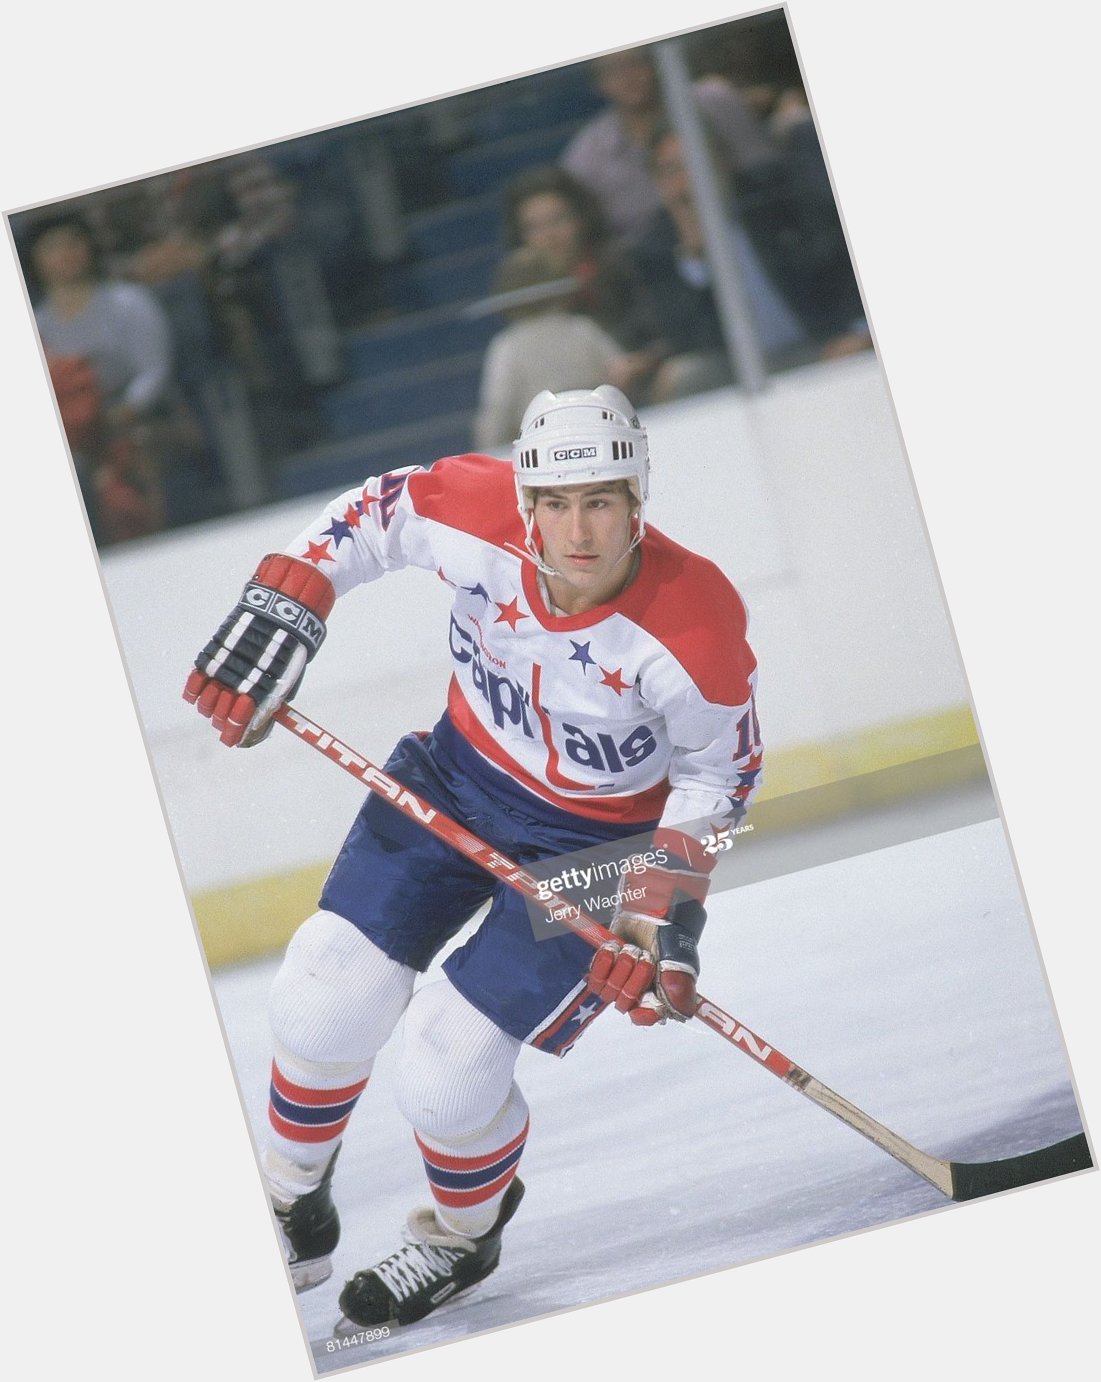 Happy Birthday to Bobby Carpenter, the first American to score 50 goals in a season.  